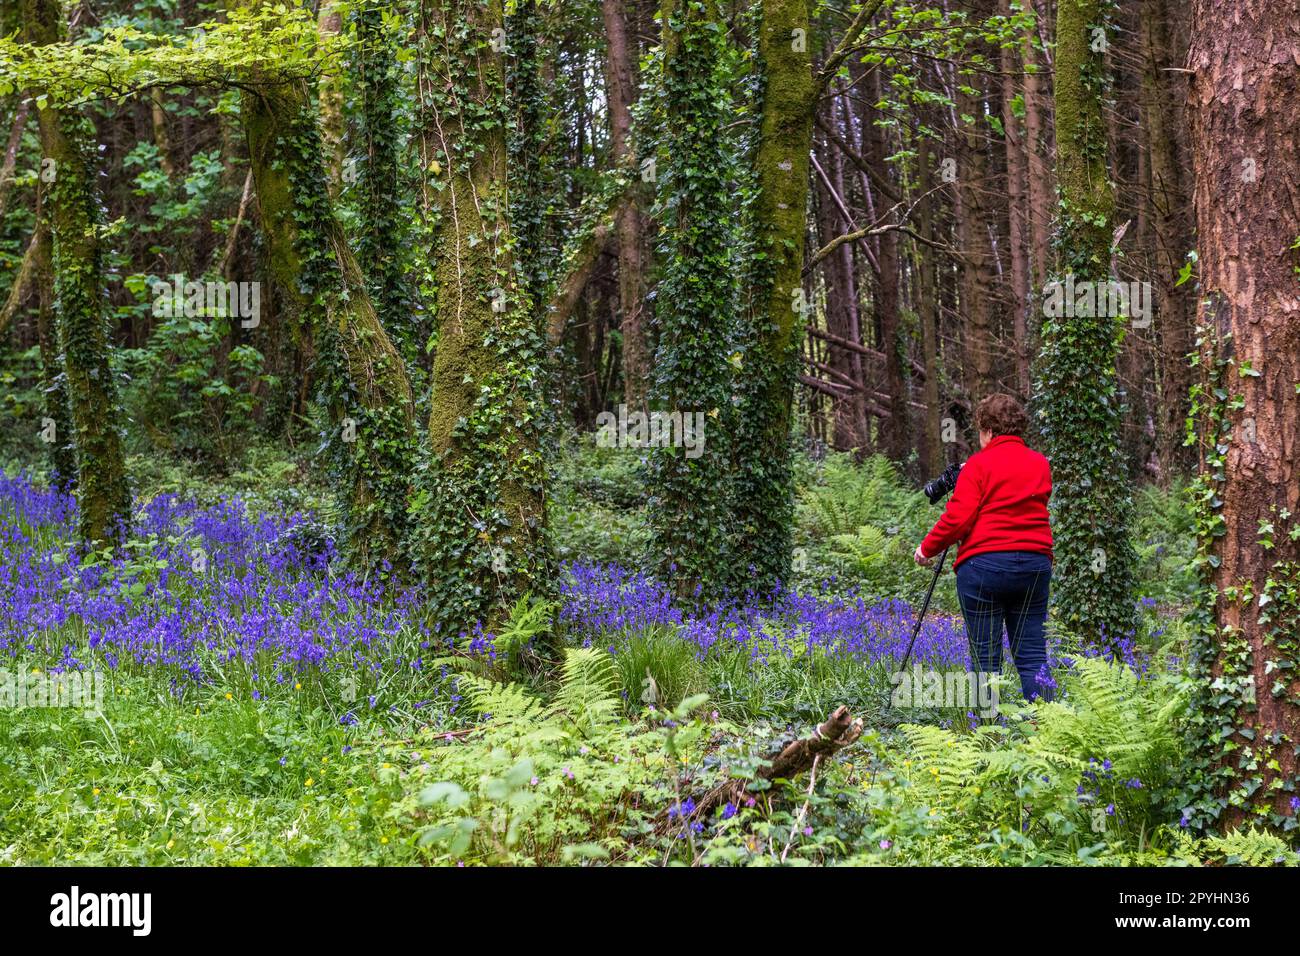 Castlefreke, West Cork, Ireland. 3rd May, 2023. Bluebells (Hyacinthoides non-scripta) were in full bloom this evening in Castlefreke Woods, West Cork. Members of Clonakilty Camera Club took to the woods to get pictures of the wild flowers. Credit: AG News/Alamy Live News. Stock Photo